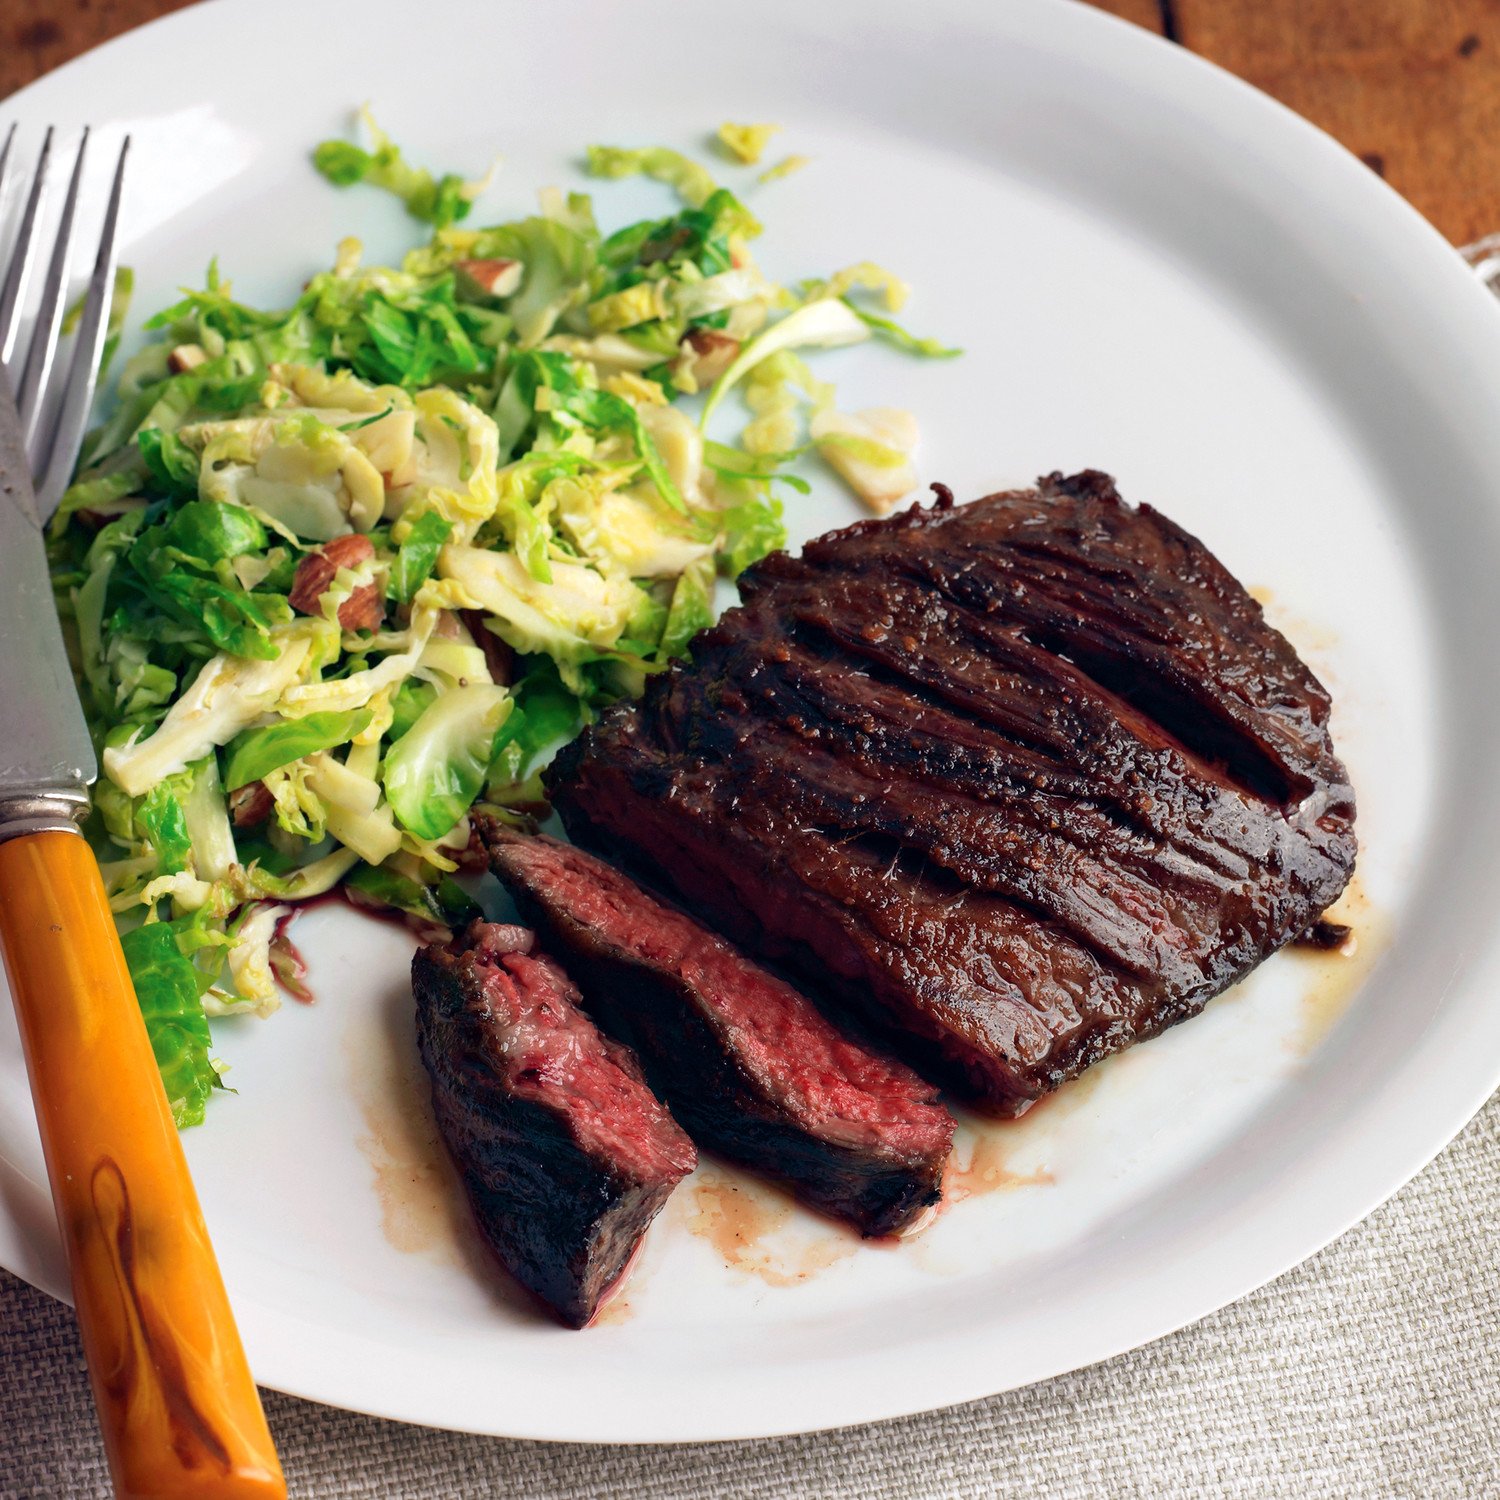 Seared Steak with Brussels Sprouts and Almonds